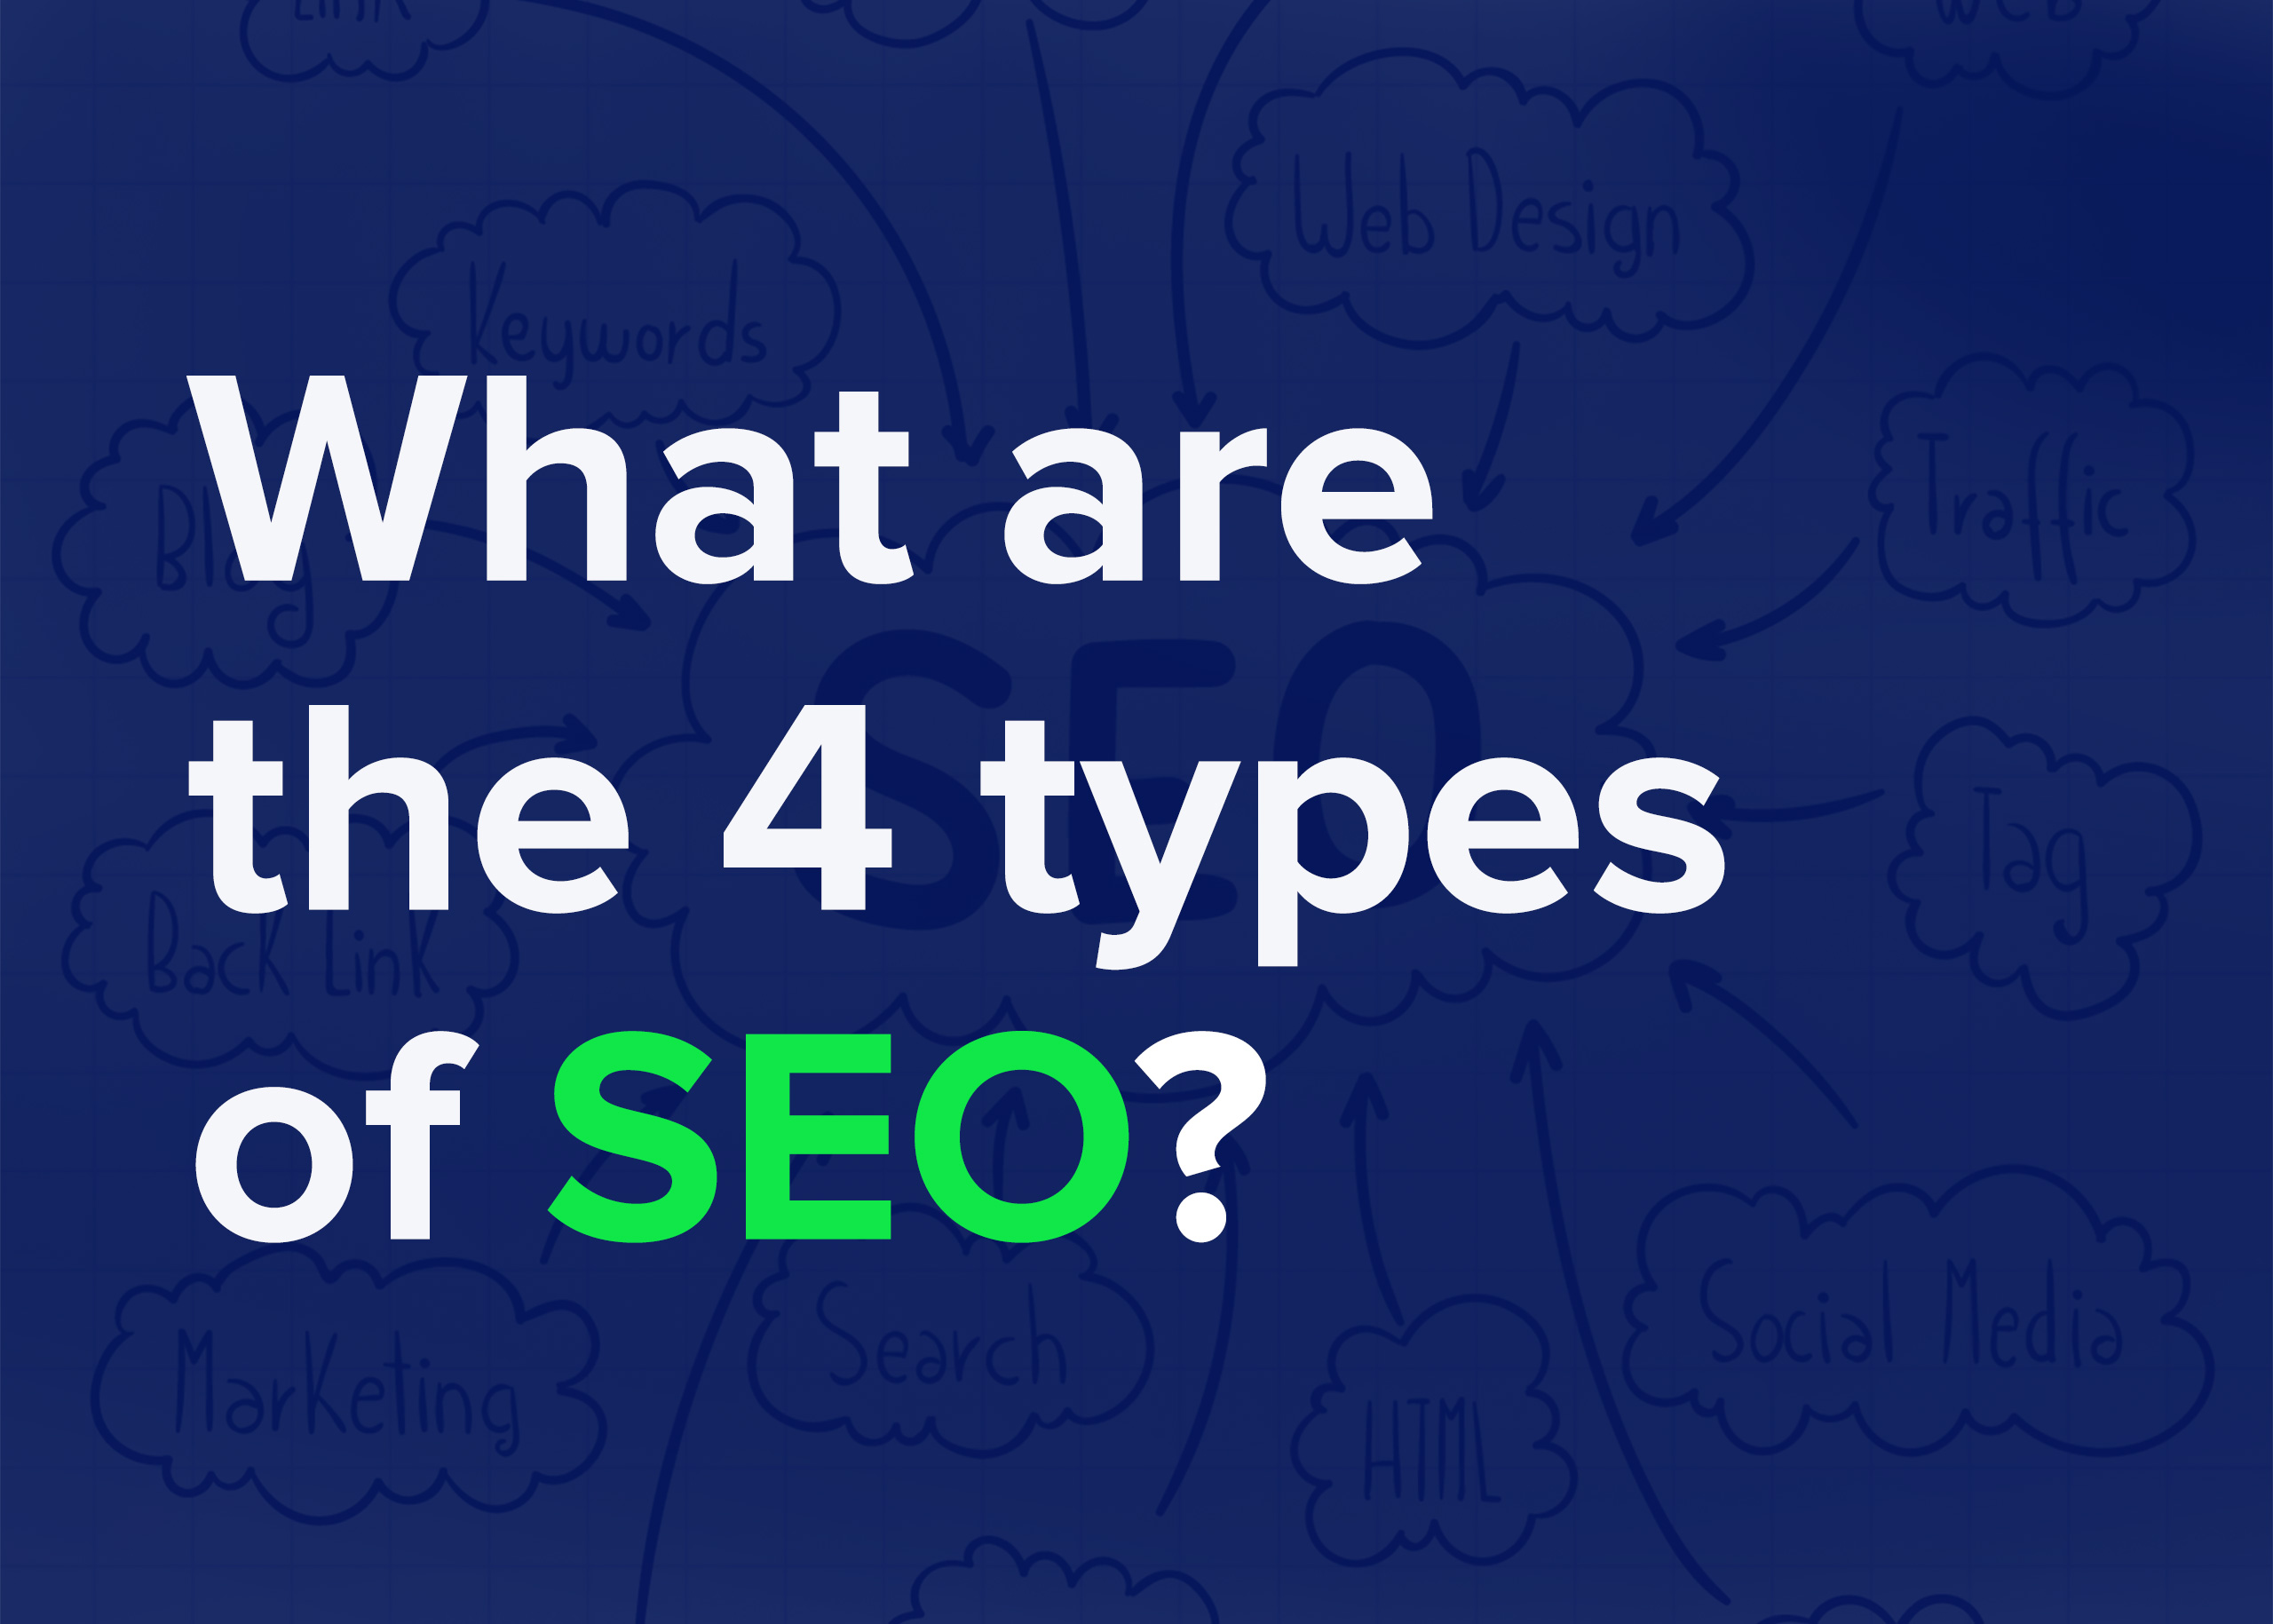 What are the 4 types of SEO?